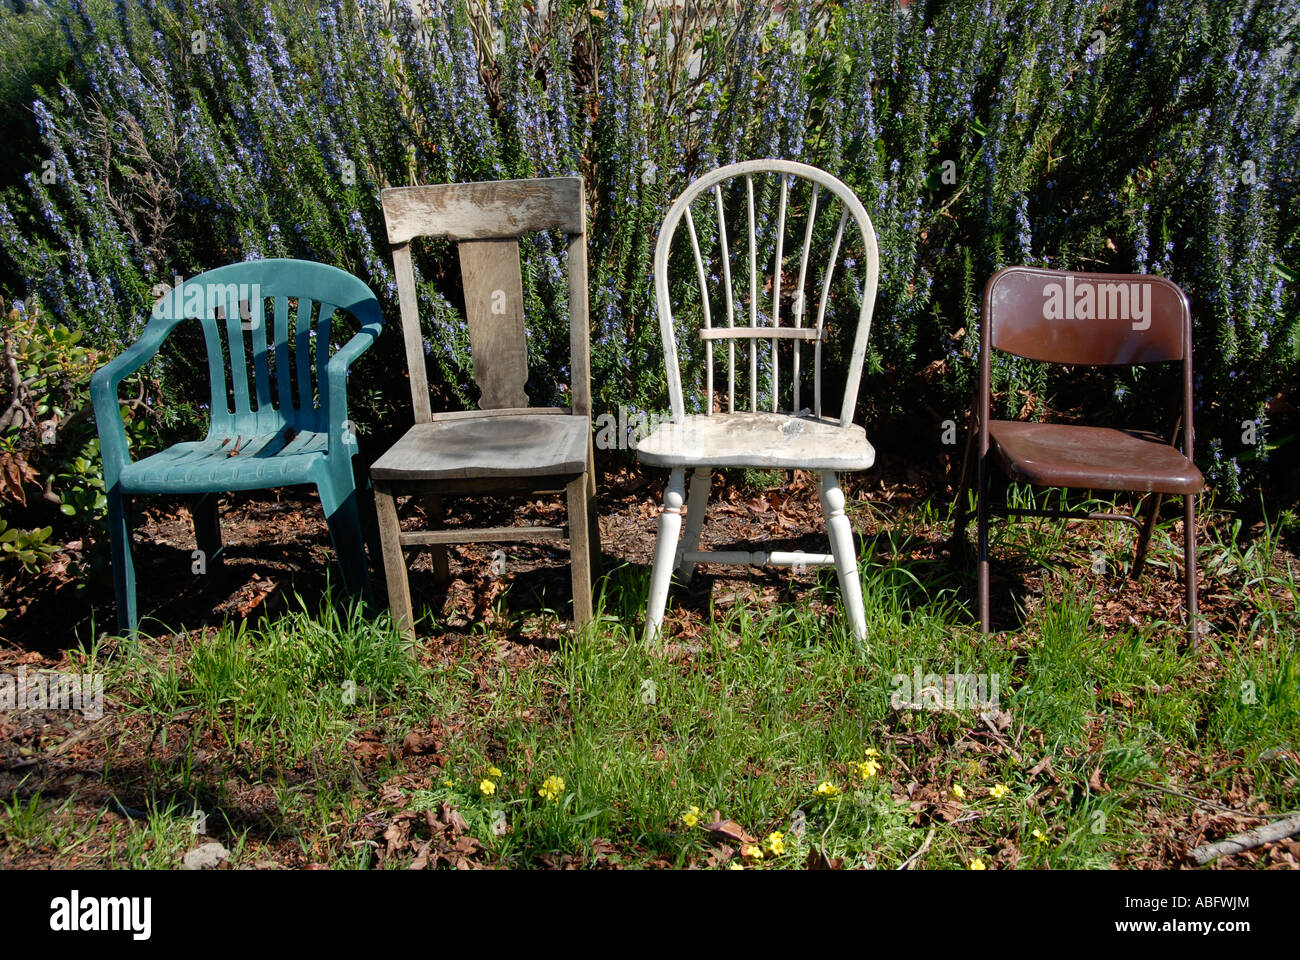 Four distinctly different old chairs stand in a community garden. Stock Photo